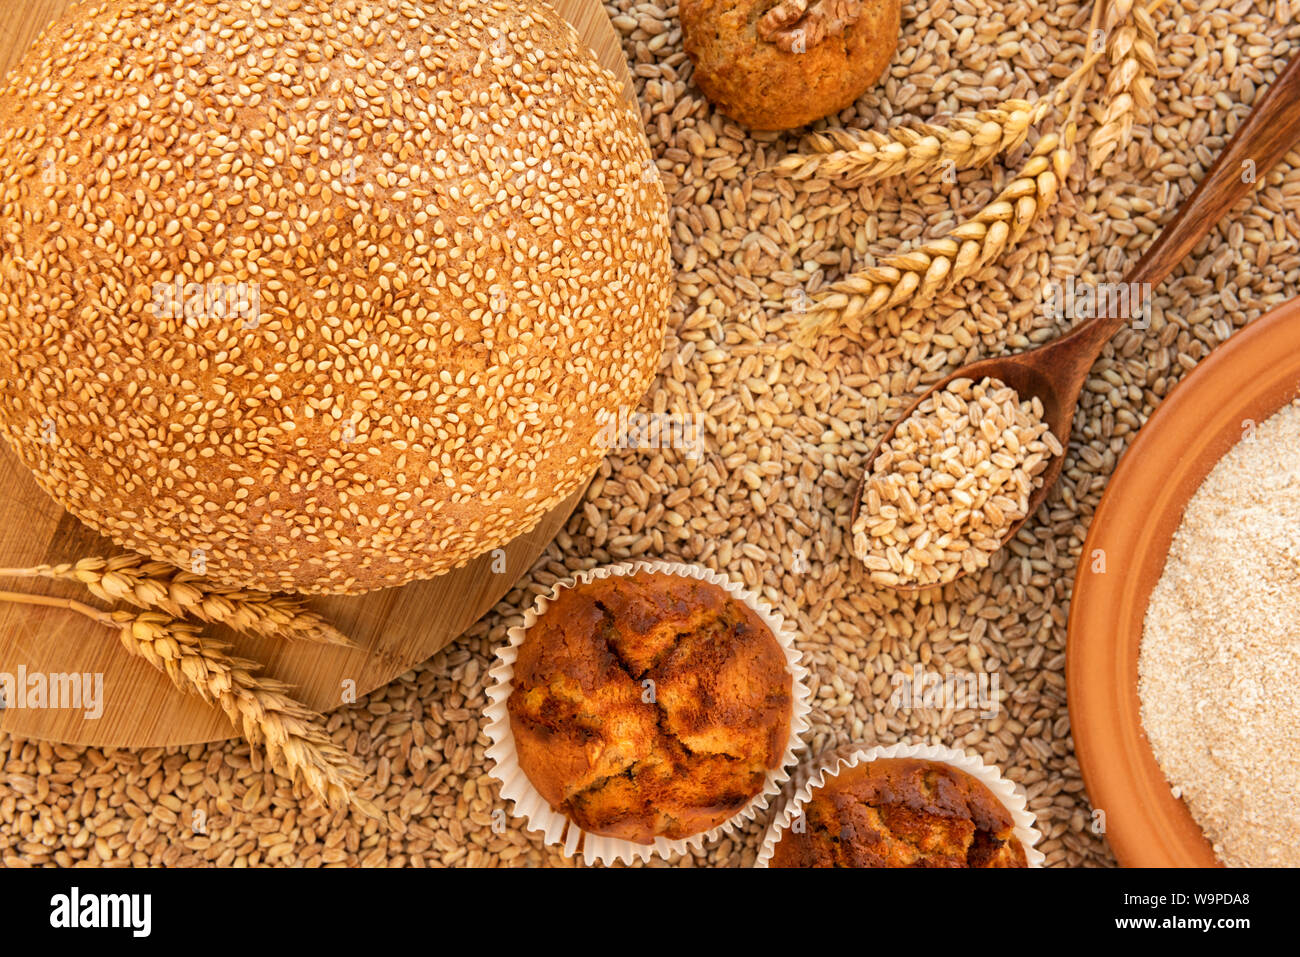 Still life of bread, muffins, cookies, spikelets, a plate of spelt flour and a spoon filled with grains.  It is against the background of scattered gr Stock Photo